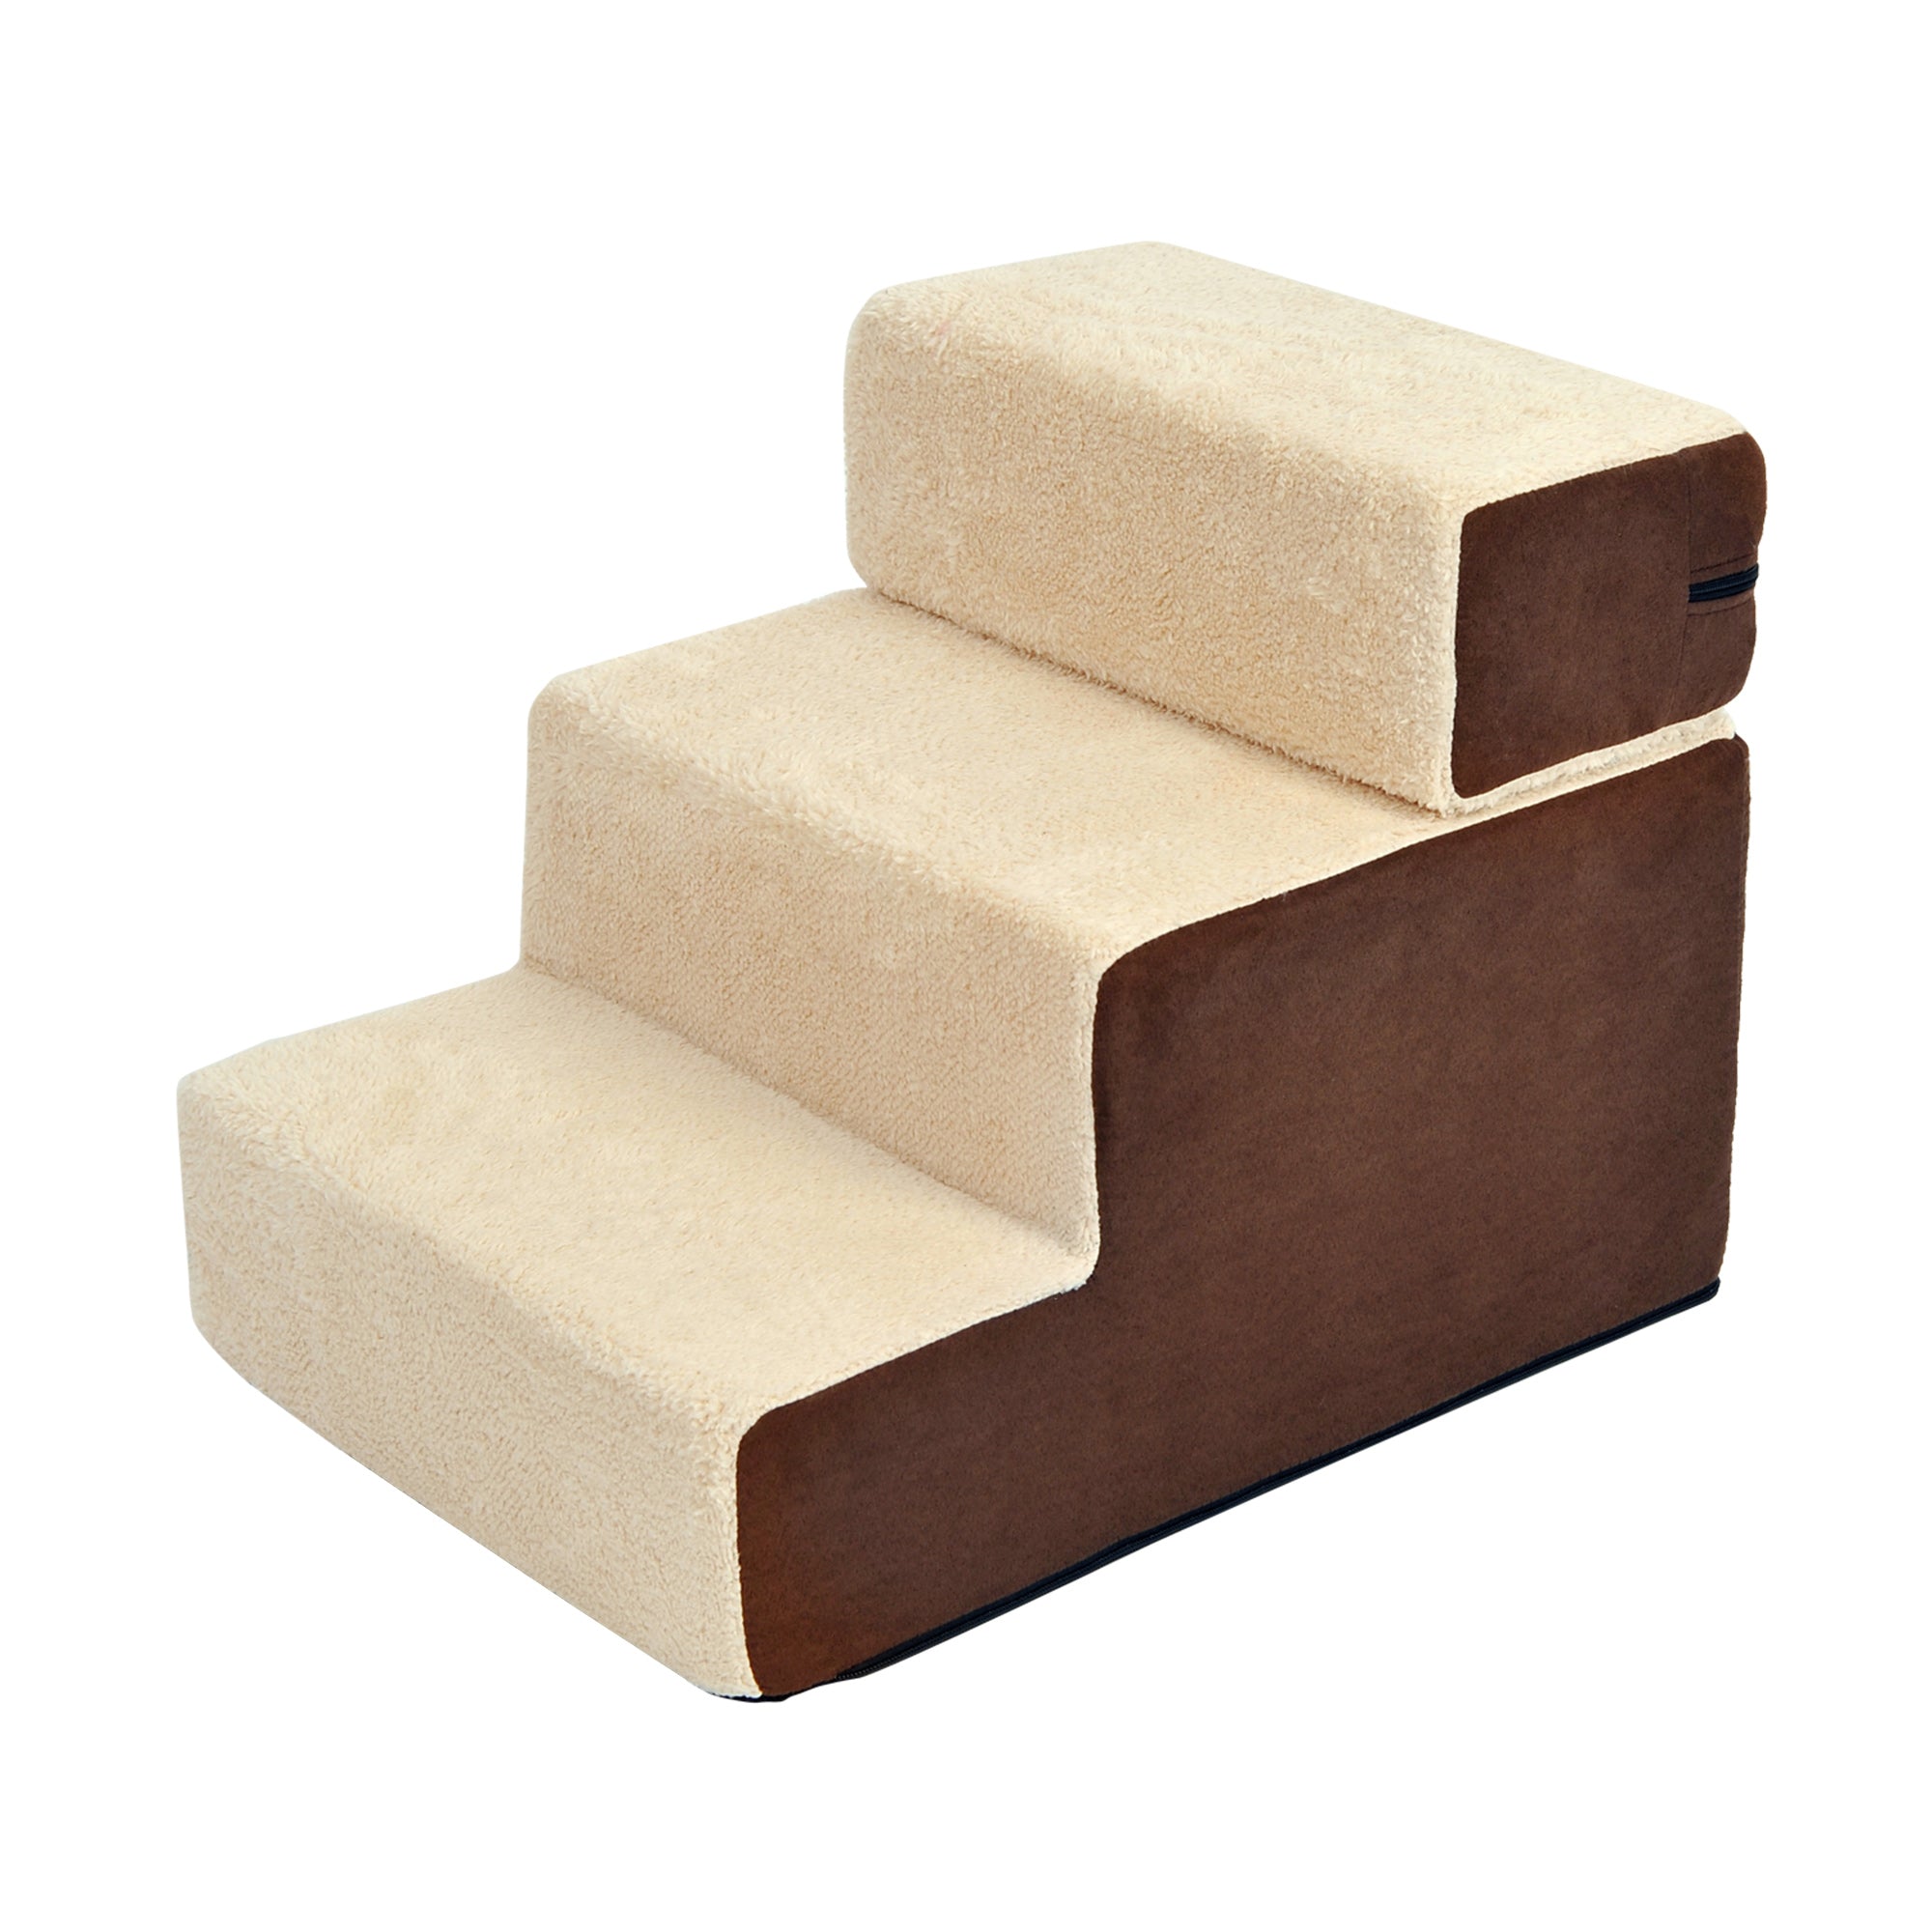 Domestic Pets Deluxe Sponge 3-Step Staircase Beige